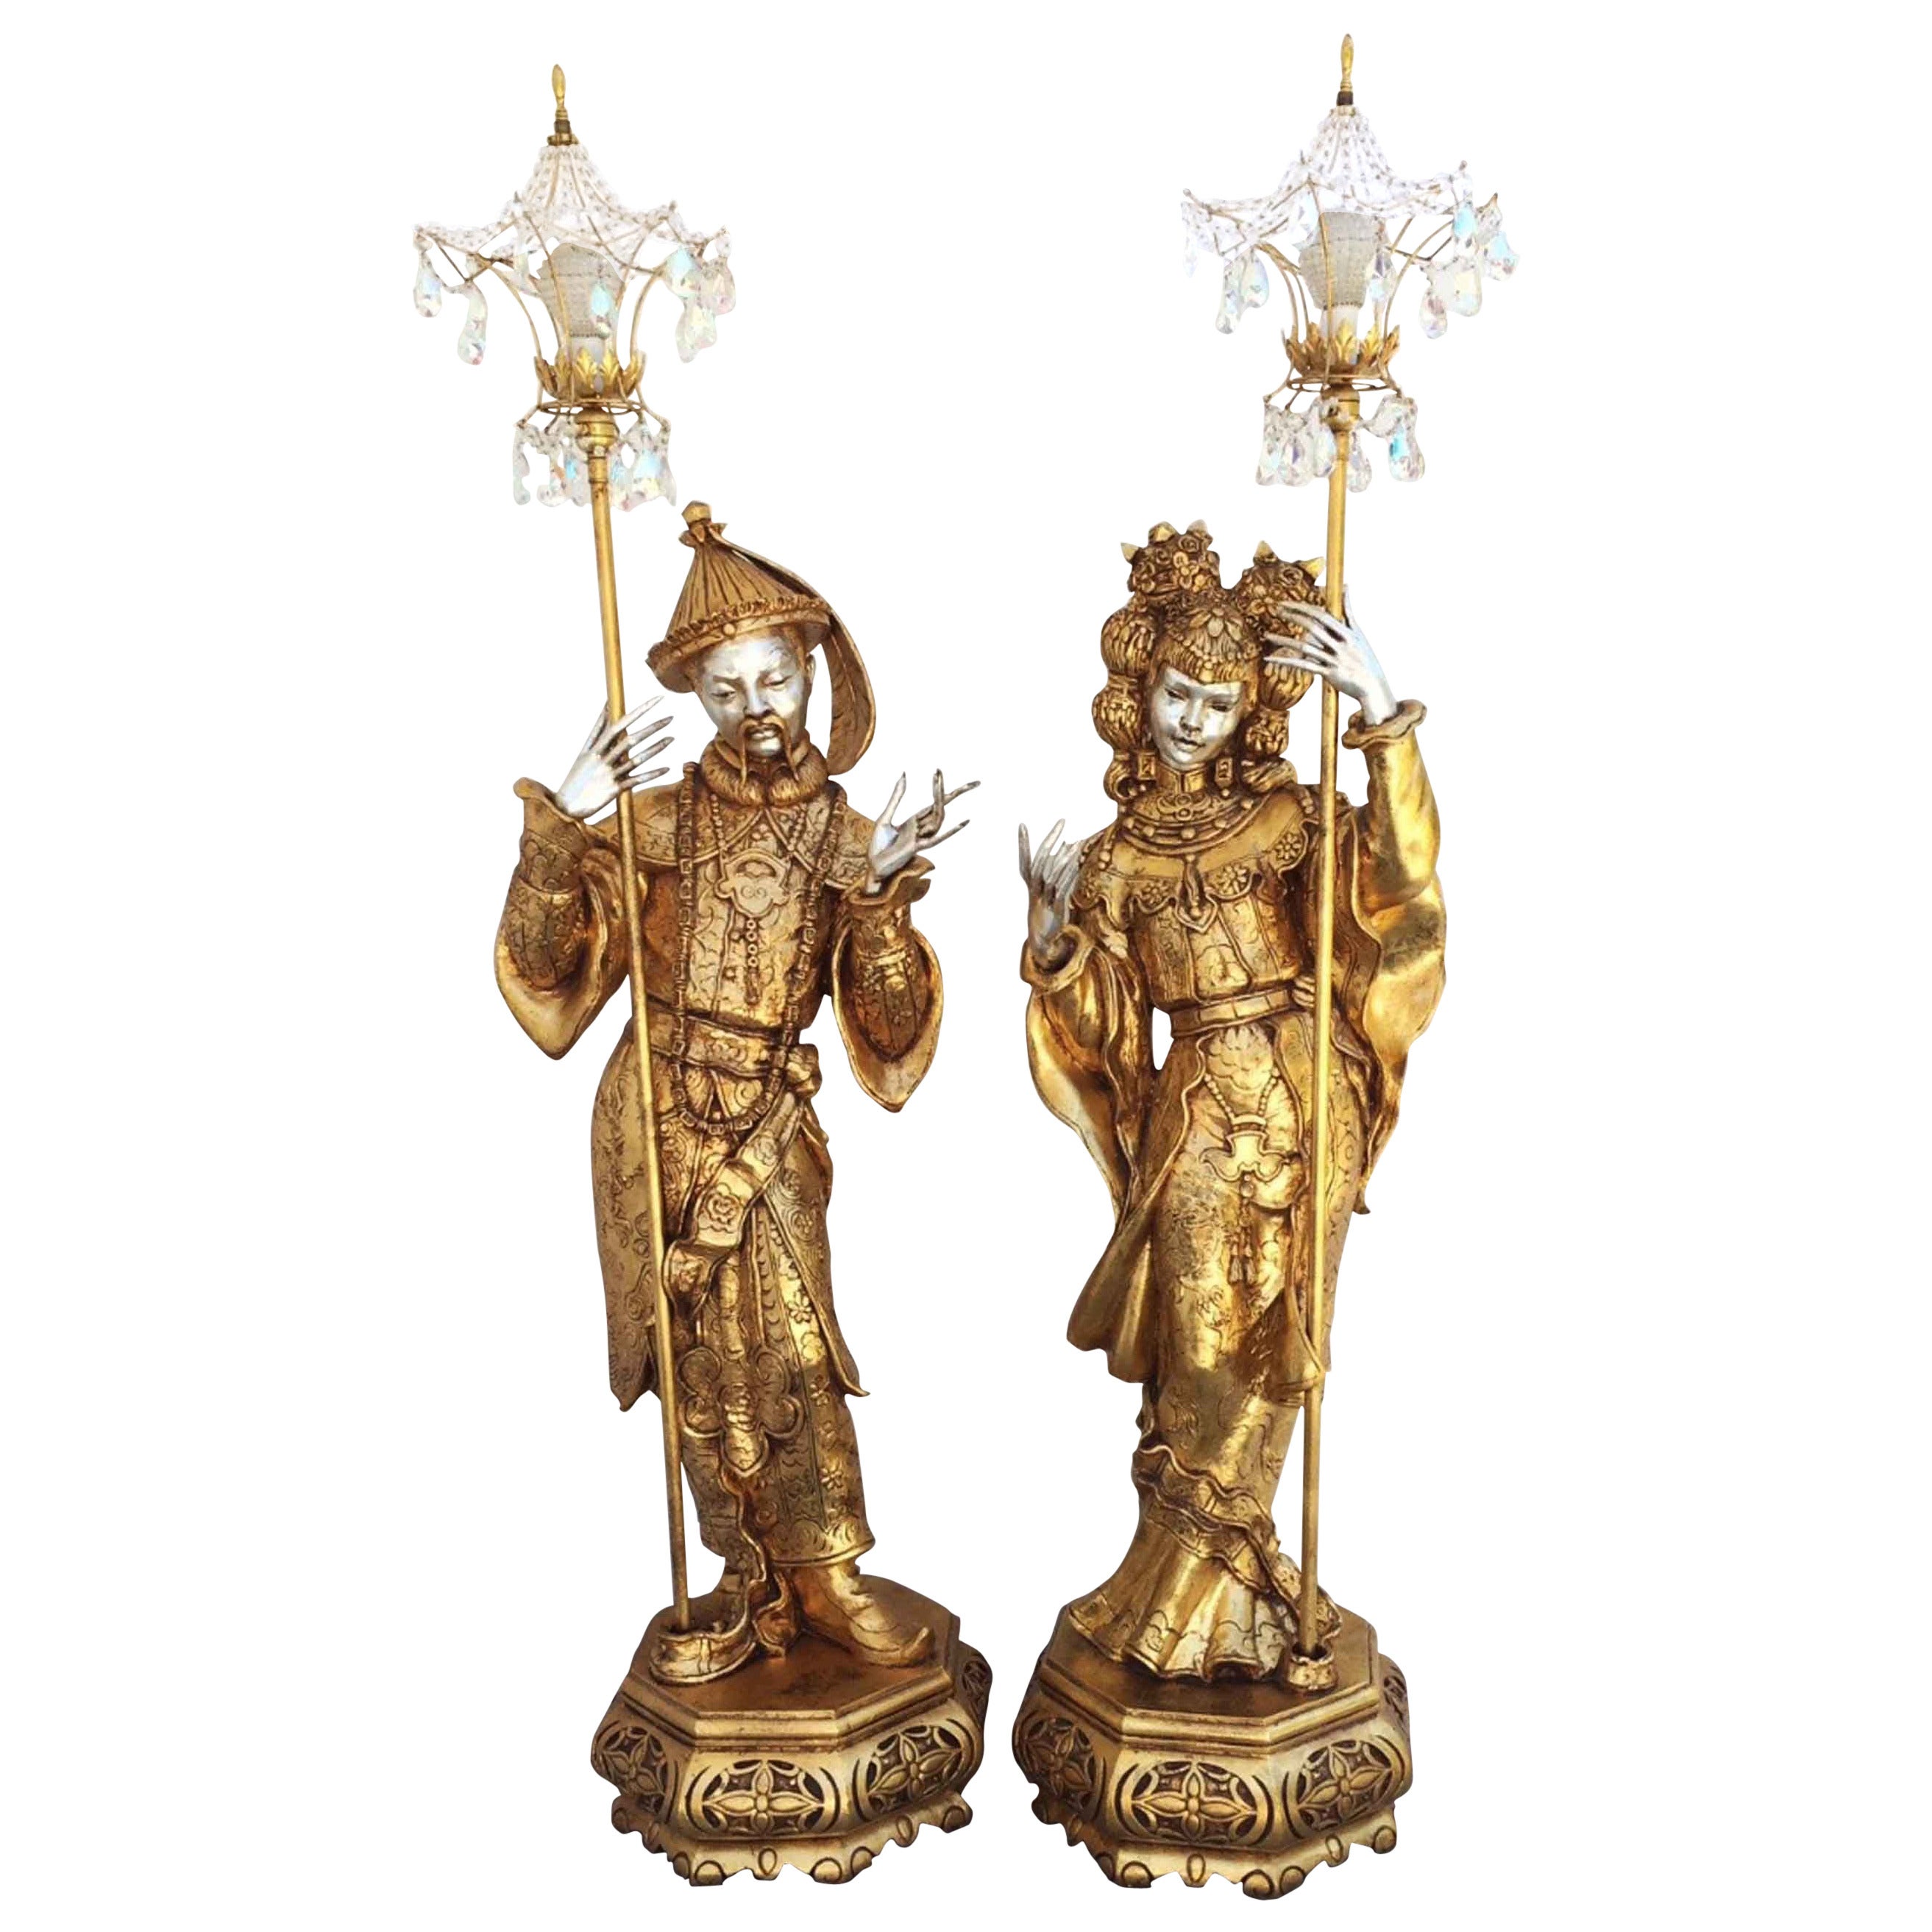 Pair of ARP Chinoiserie Fantasy Torchiere Lamps, 1950s